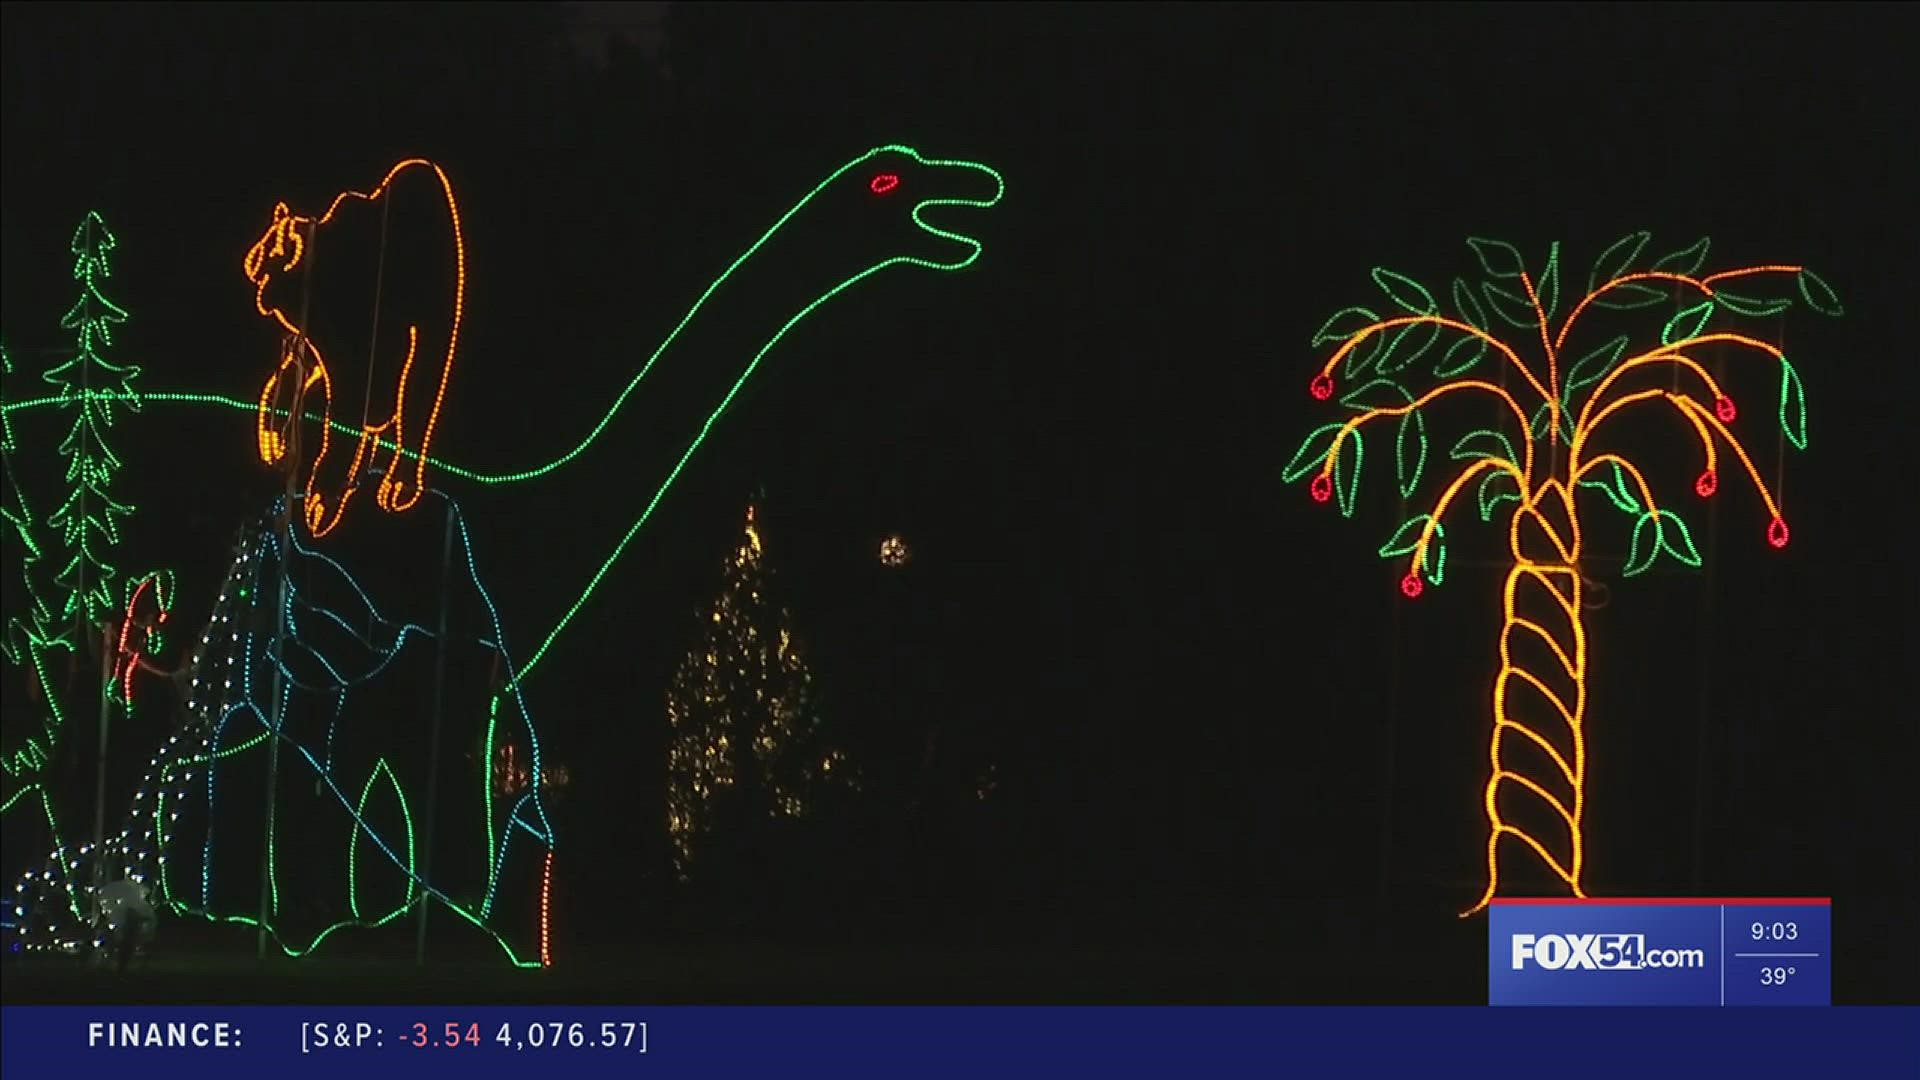 Galaxy of Lights driving nights begin today through December 16th from 5:30 P.M. until 9 P.M.